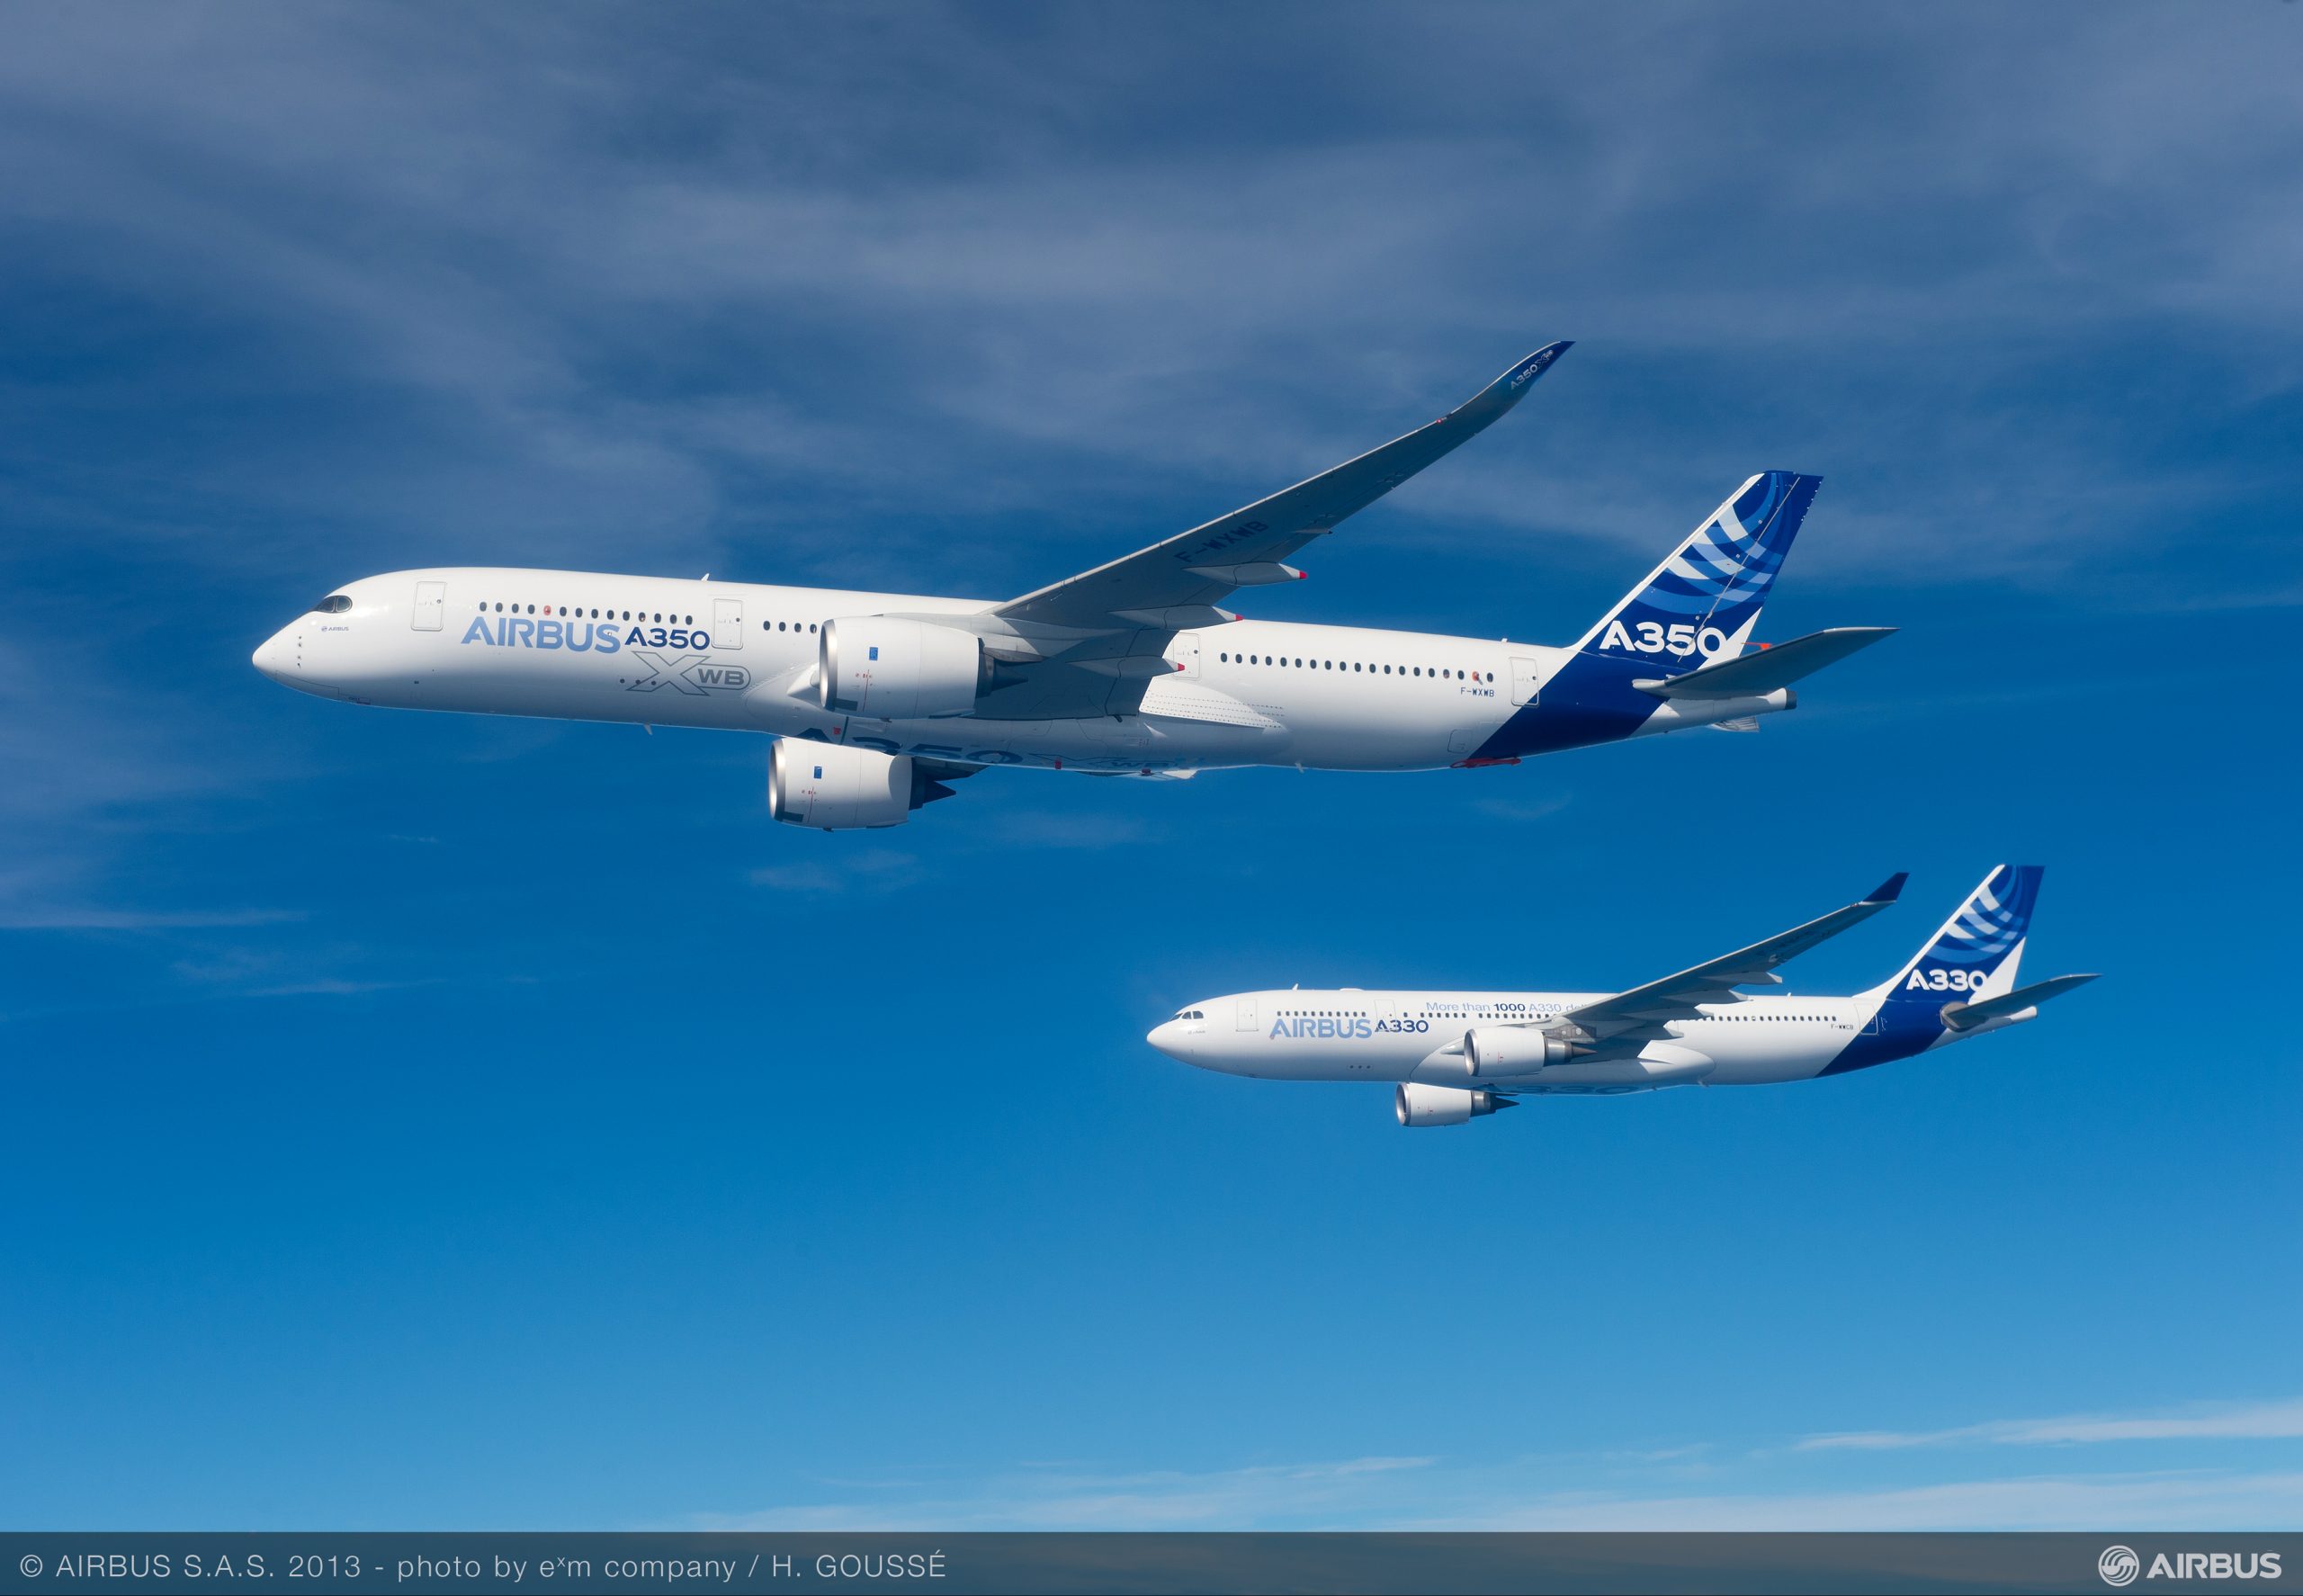 FL Technics receives certification to provide Airbus A350 type training